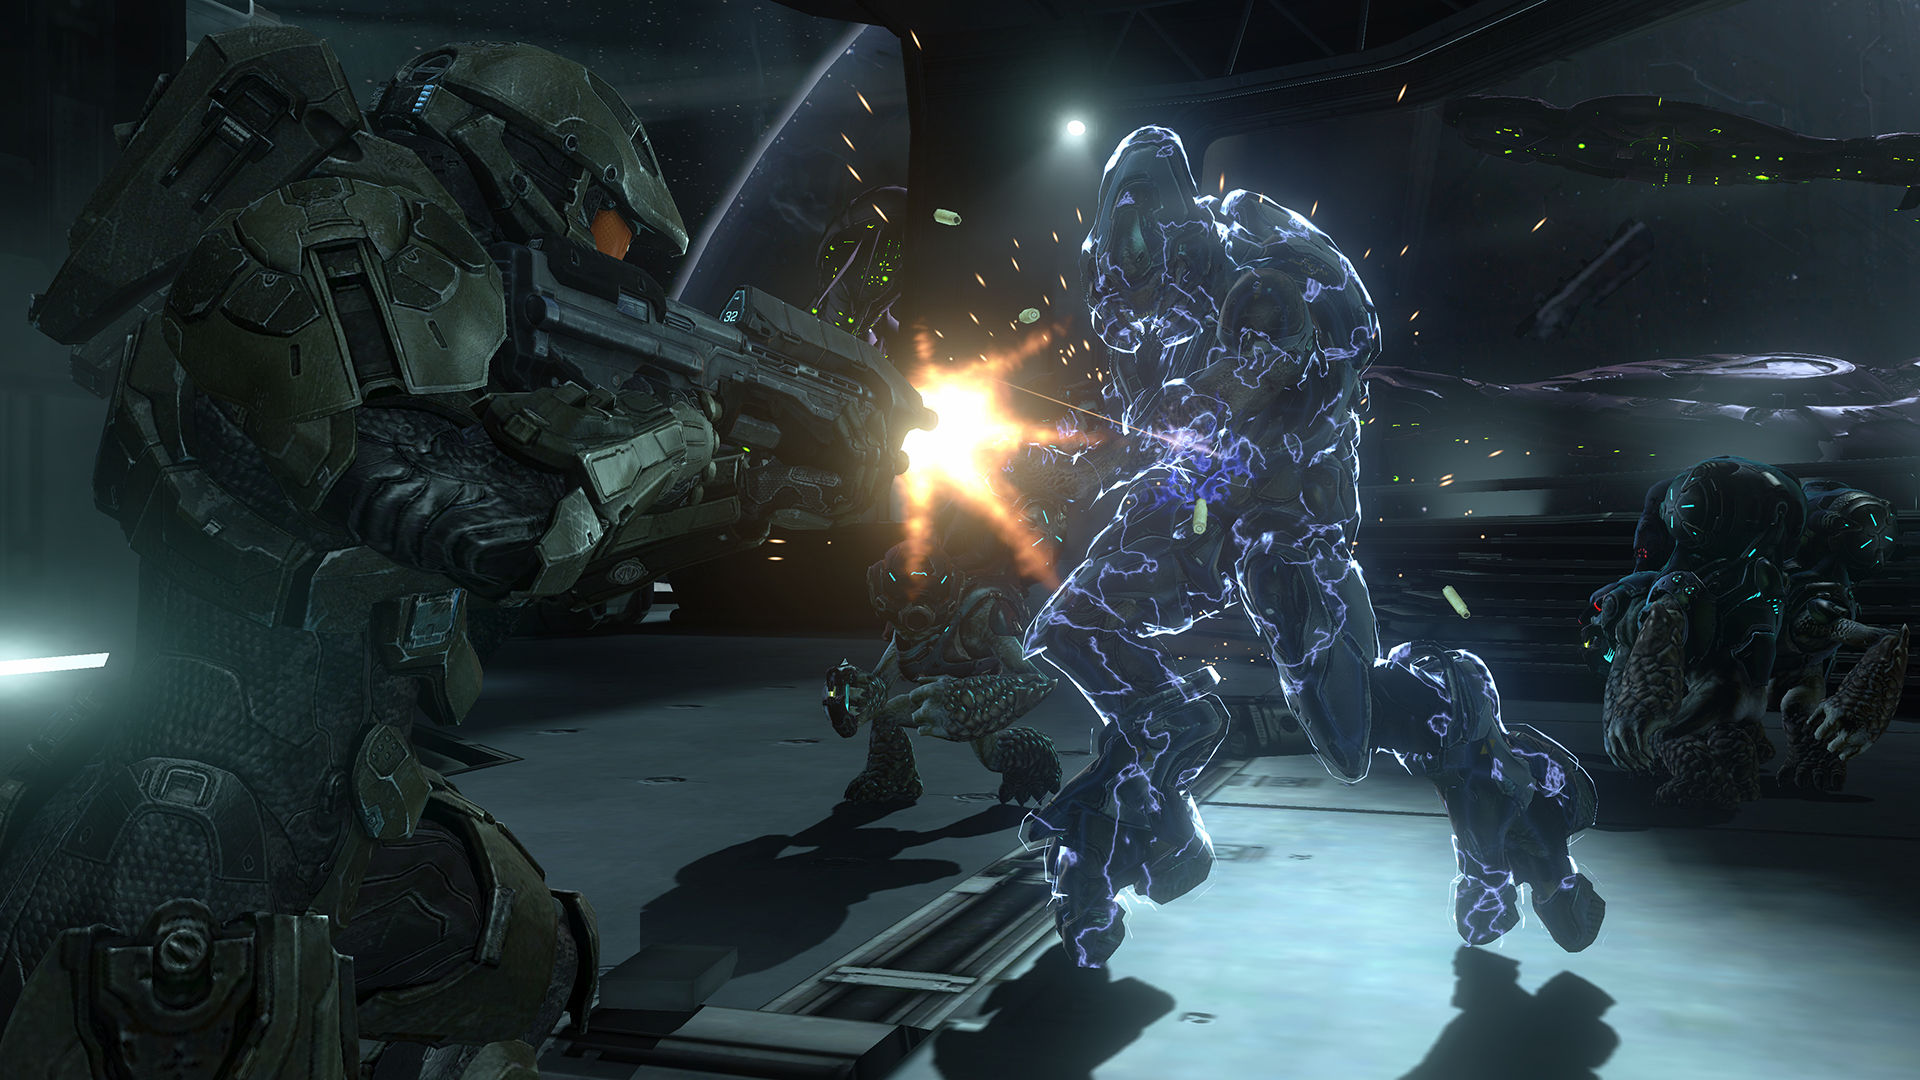 Halo 4’s upcoming test flight will let you try out new Forge features